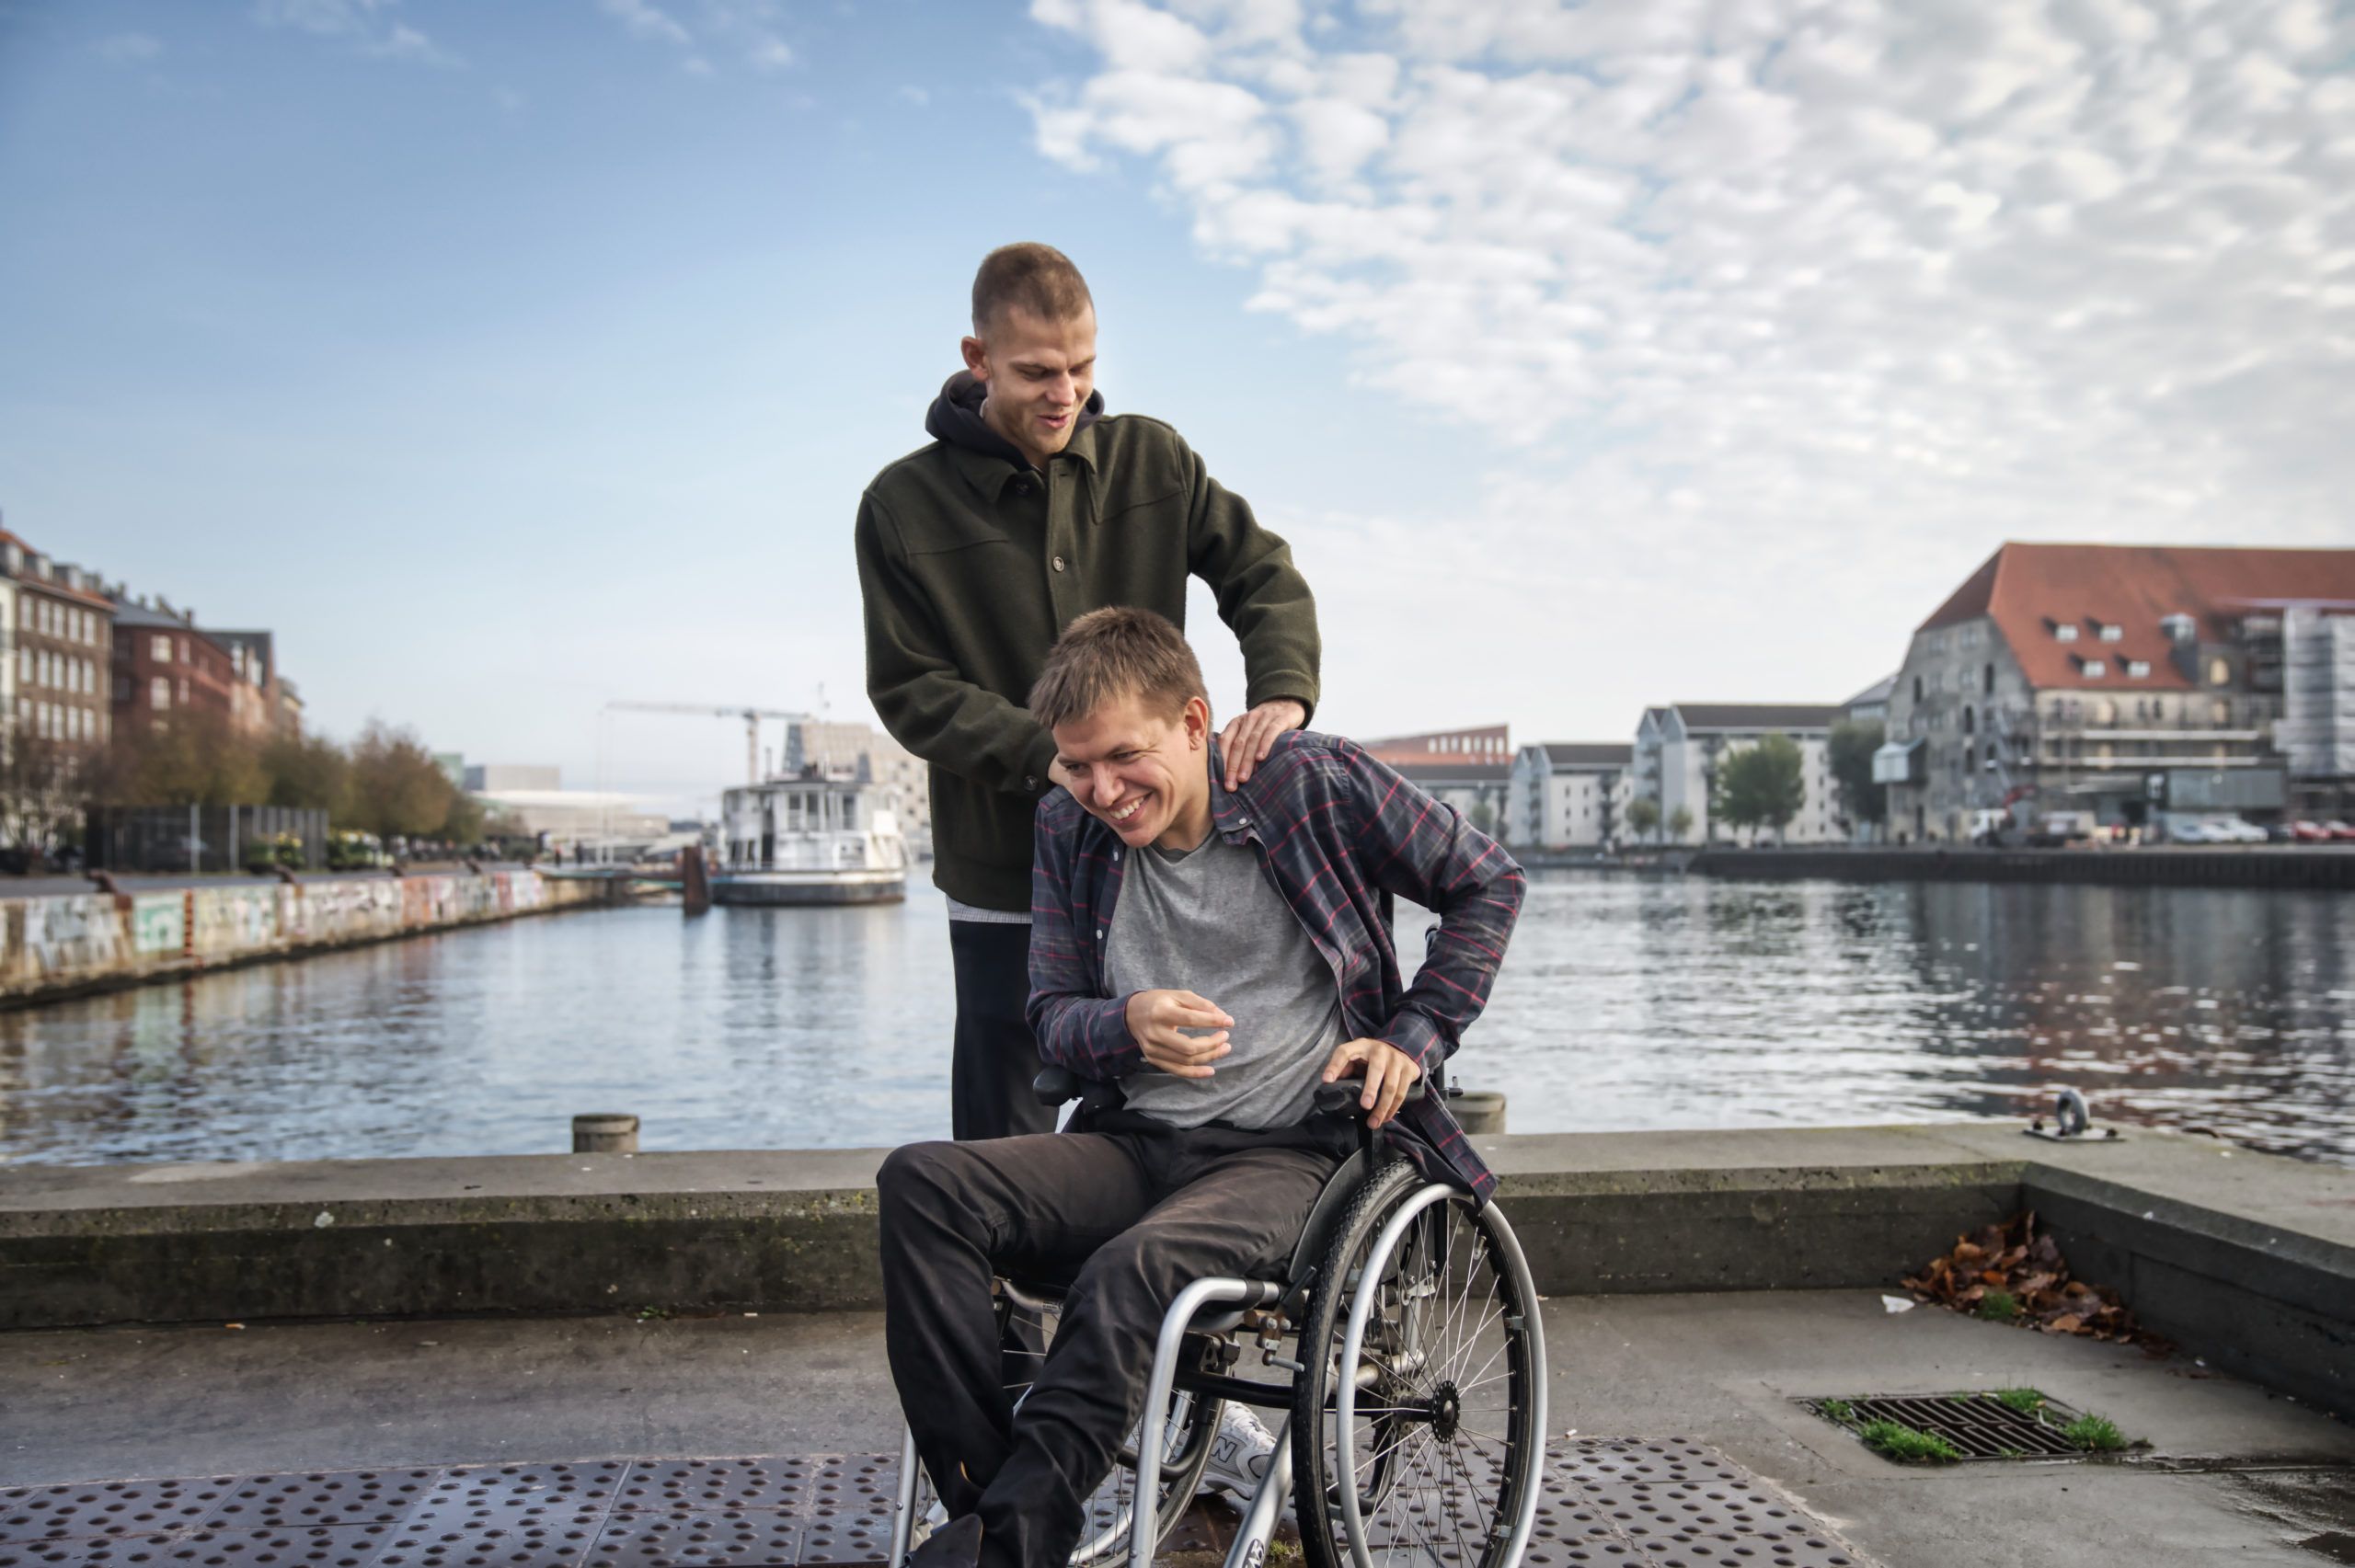 Young man with cerebral palsy and his caregiver